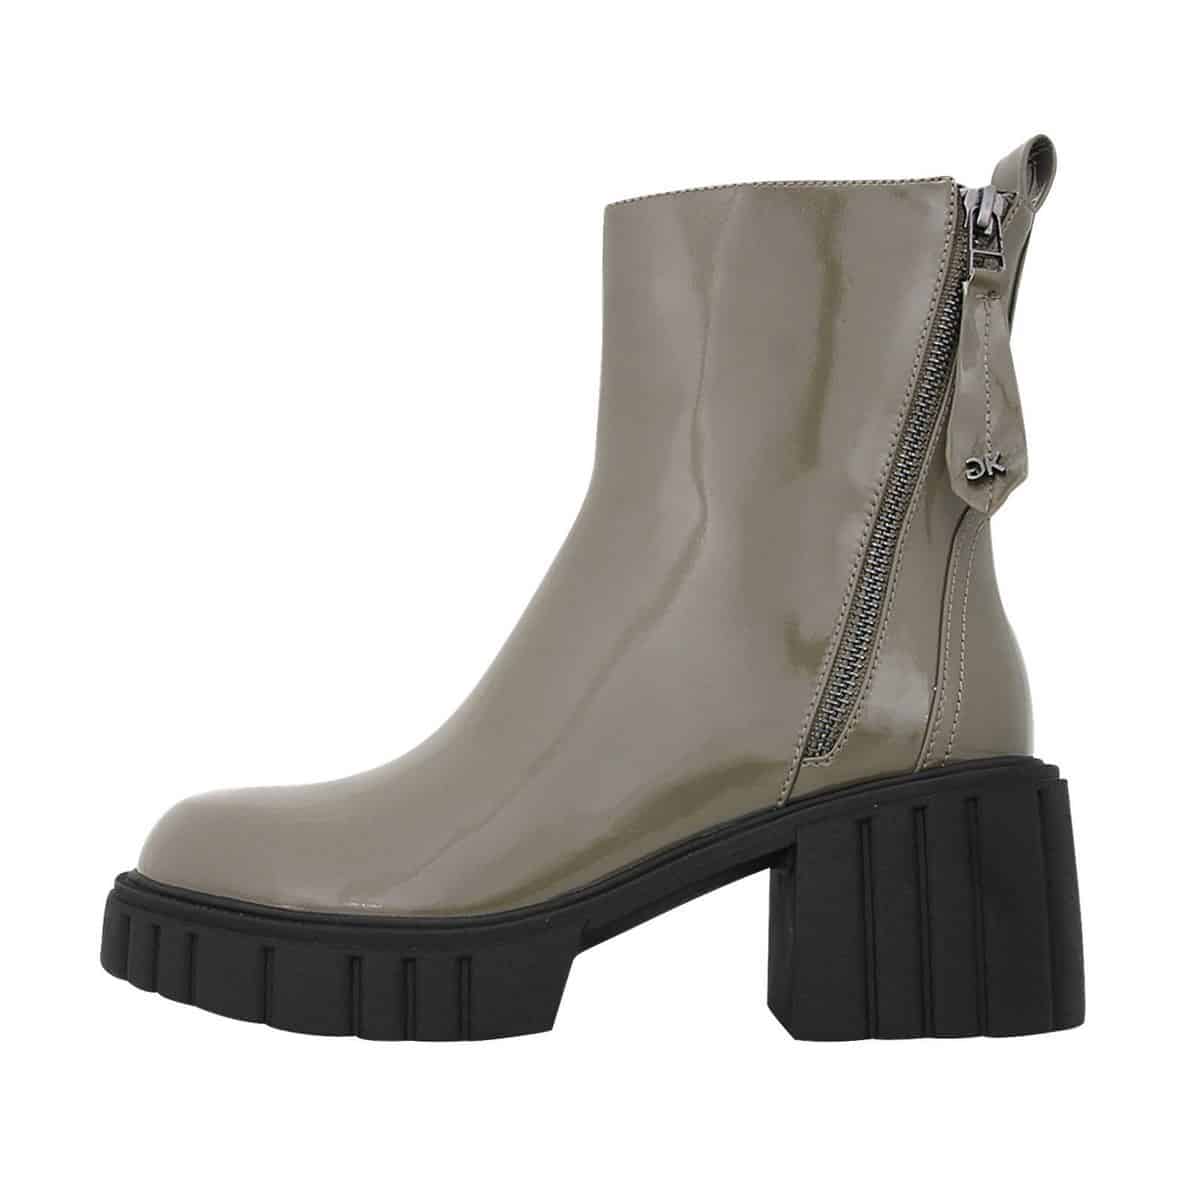 PATENT CHELSEA BOOTS WITH ZIPPER 3838A146/2 GIANNA KAZAKOU OLIVE GREEN